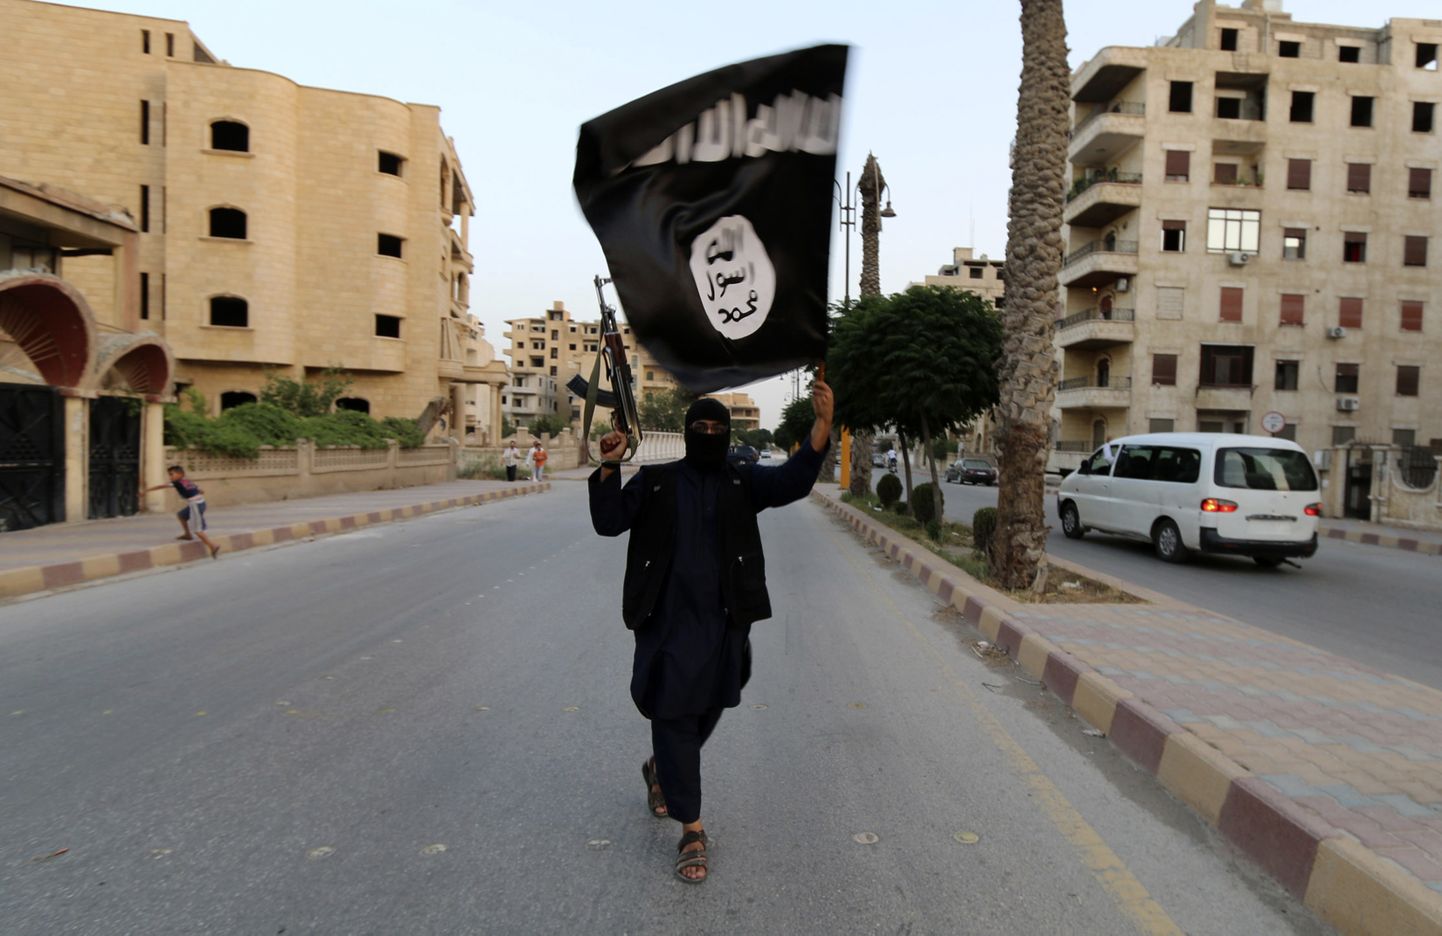 A member loyal to the Islamic State in Iraq and the Levant (ISIL) waves an ISIL flag in Raqqa June 29, 2014. The offshoot of al Qaeda which has captured swathes of territory in Iraq and Syria has declared itself an Islamic "Caliphate" and called on factions worldwide to pledge their allegiance, a statement posted on jihadist websites said on Sunday. The group, previously known as the Islamic State in Iraq and the Levant (ISIL), also known as ISIS, has renamed itself "Islamic State" and proclaimed its leader Abu Bakr al-Baghadi as "Caliph" - the head of the state, the statement said. REUTERS/Stringer (SYRIA - Tags: POLITICS CIVIL UNREST TPX IMAGES OF THE DAY)